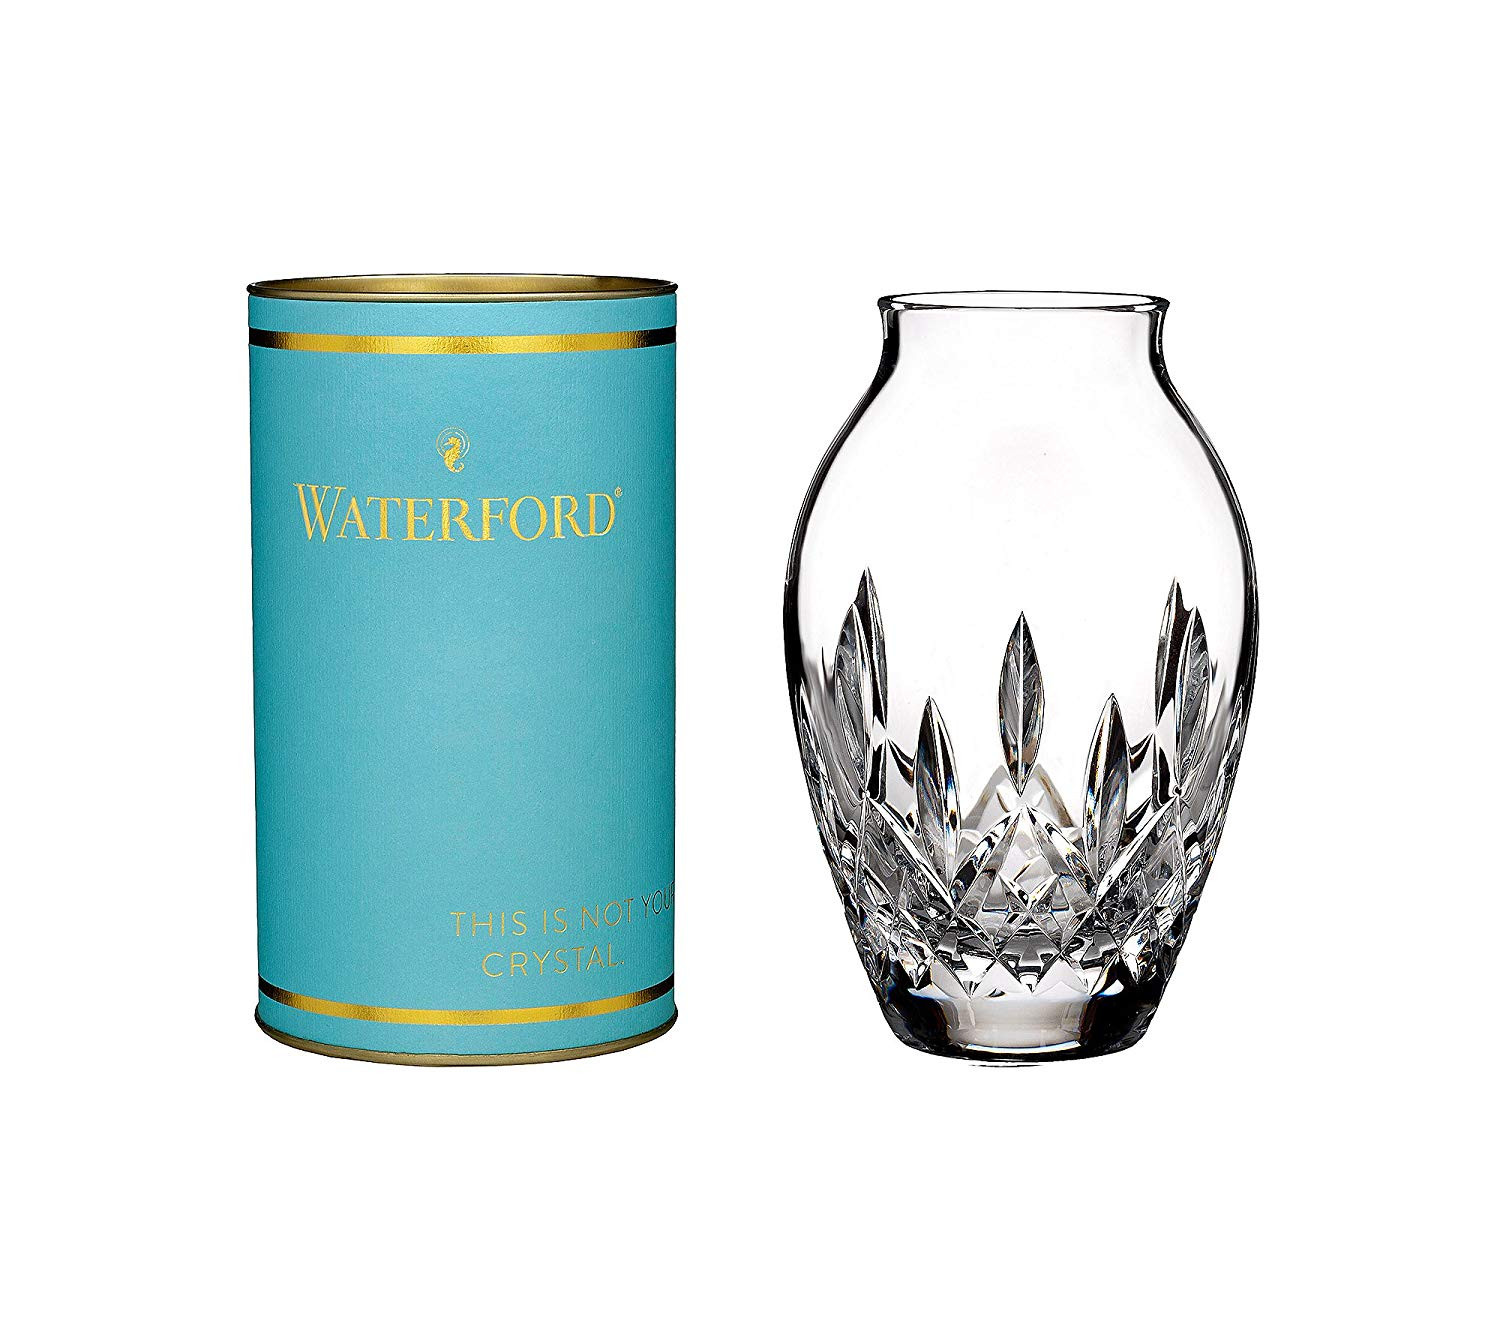 28 Perfect Waterford Giftology Lismore Sugar Bud Vase 2022 free download waterford giftology lismore sugar bud vase of amazon com waterford giftology lismore 6 candy vase home kitchen pertaining to 81skg0altal sl1500